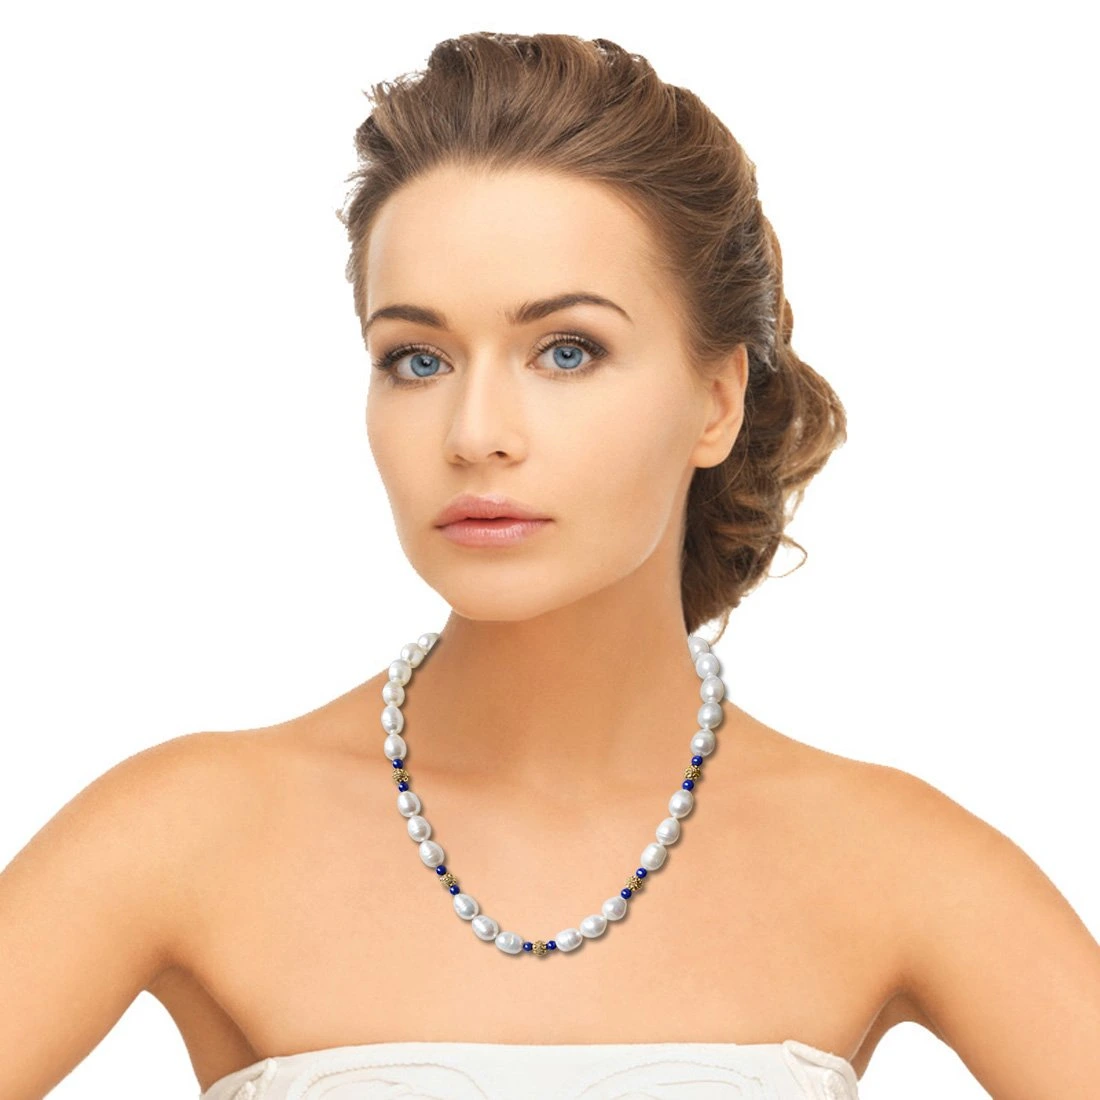 Single Line Blue Lapiz, Big Elongated Pearl and Gold Plated Ball Necklace for Women (SN925)